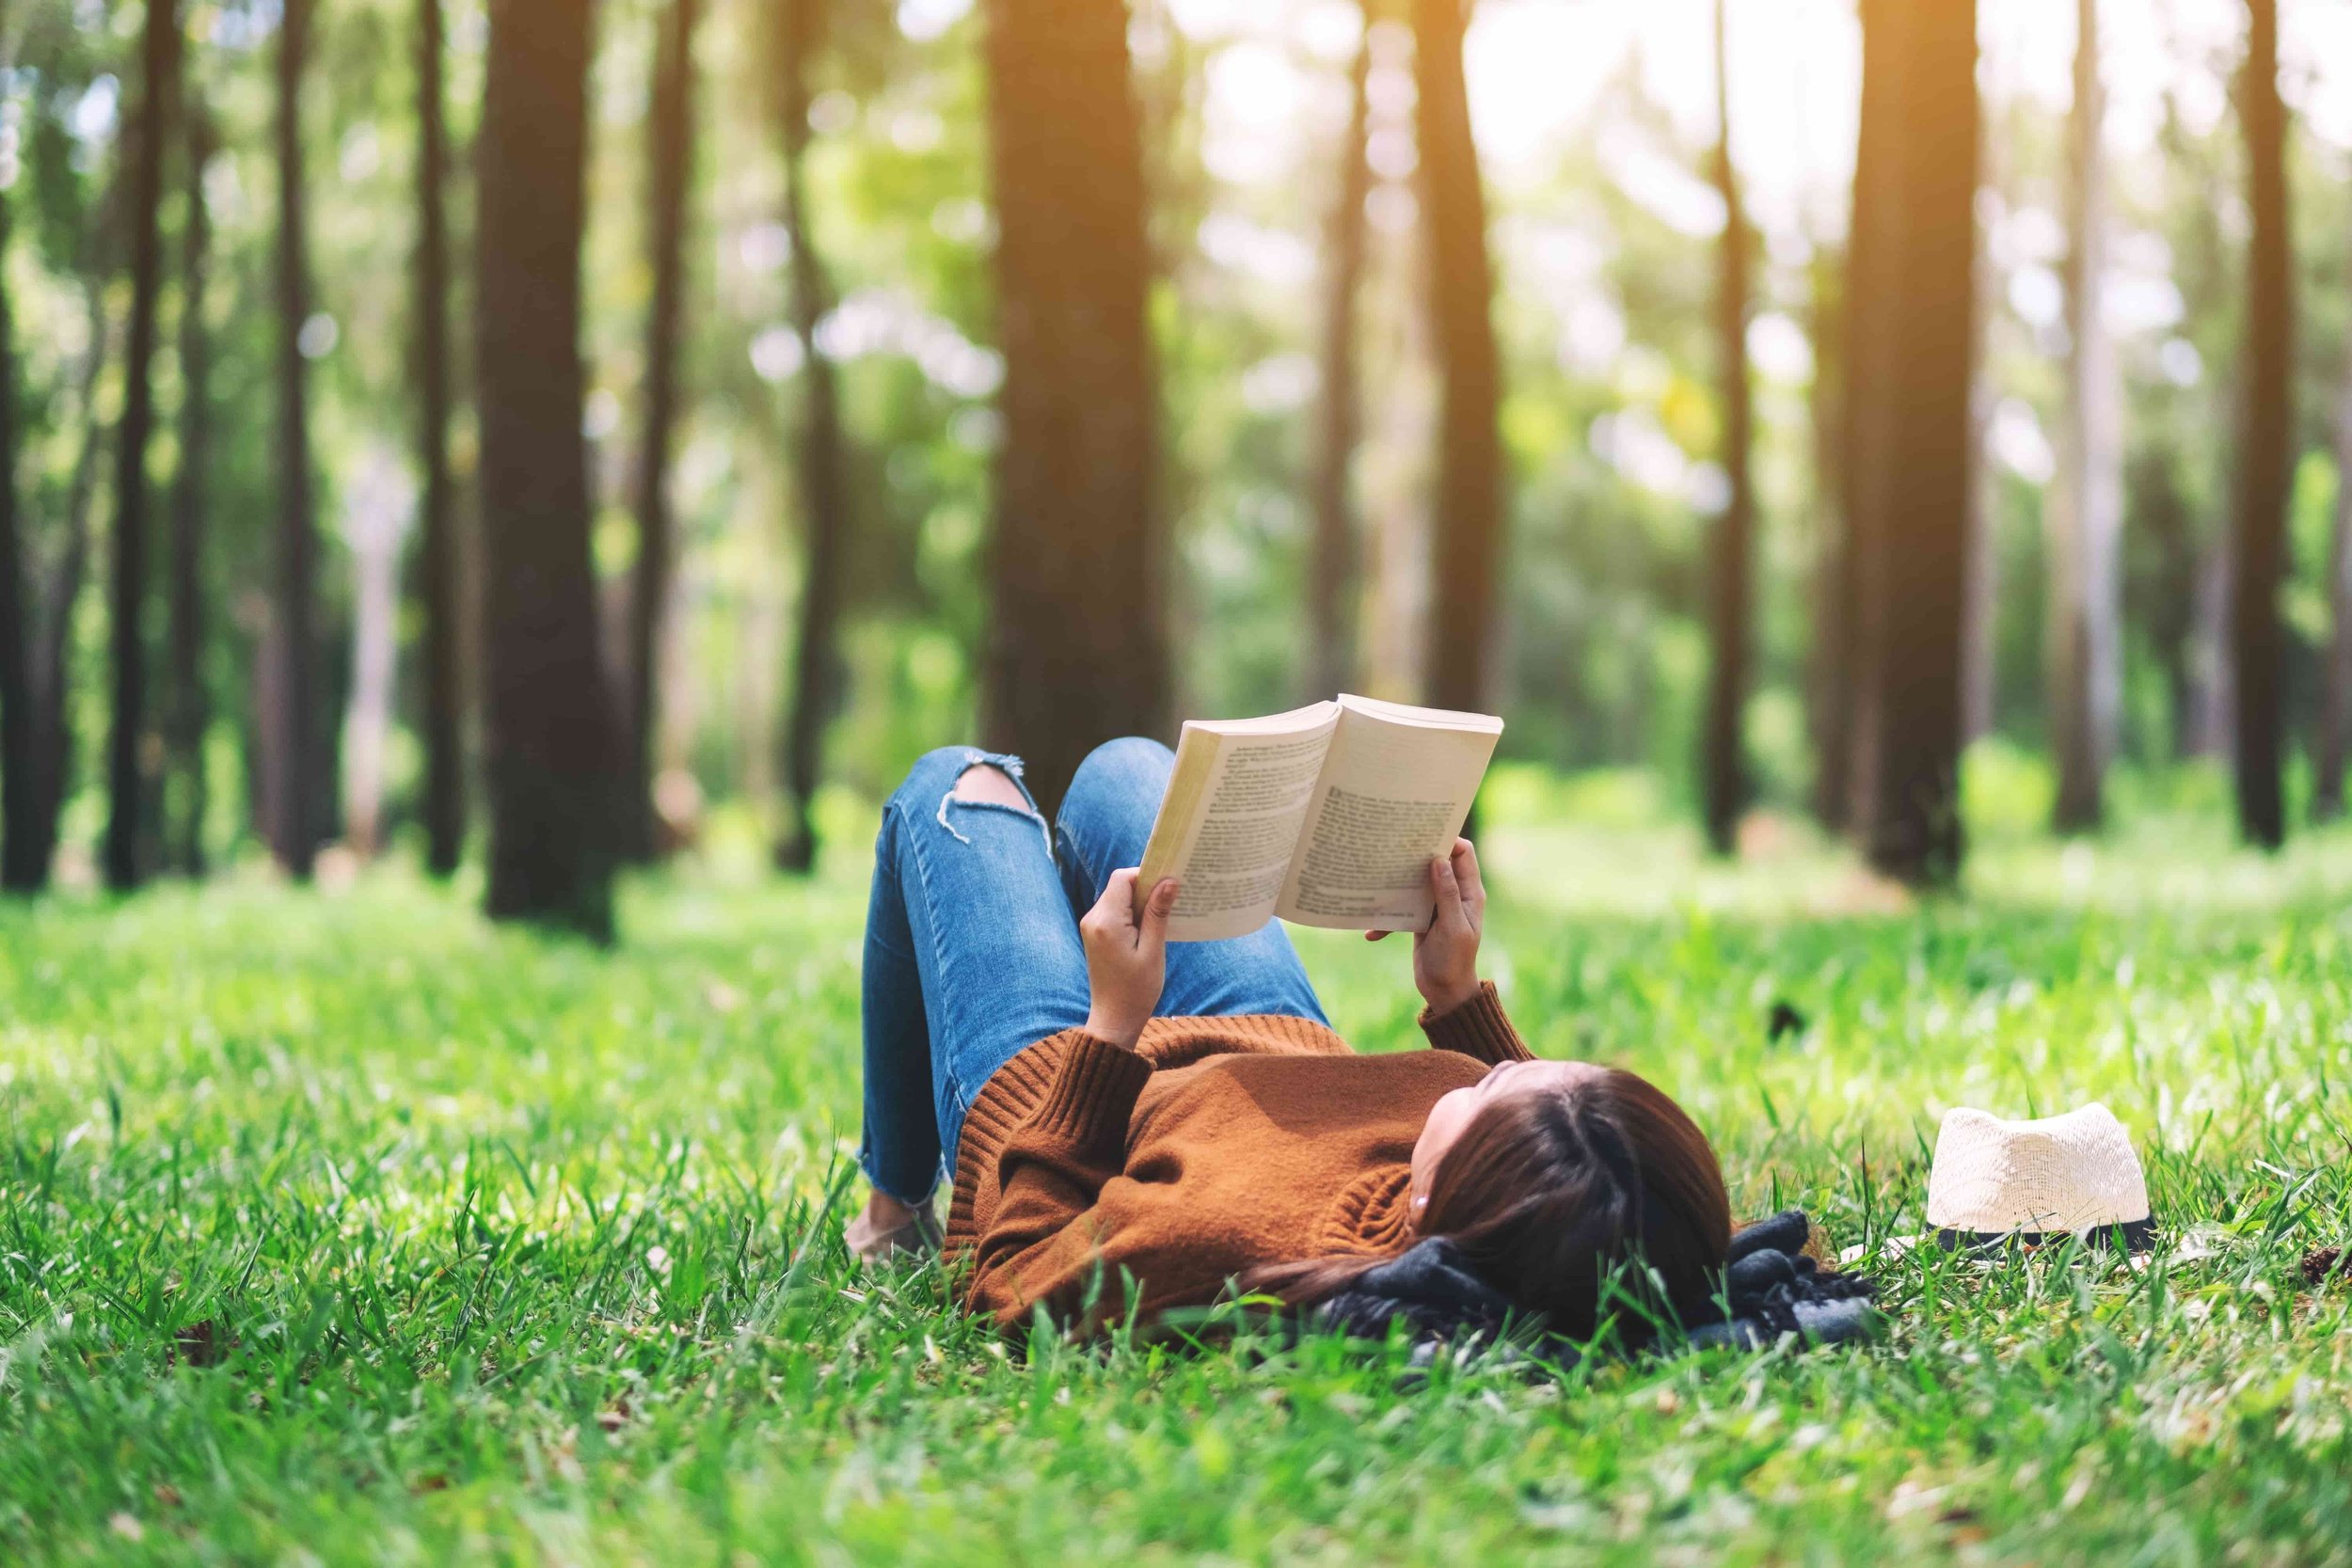 Person Lying Down On The Grass Surrounded By Trees Reading A Book